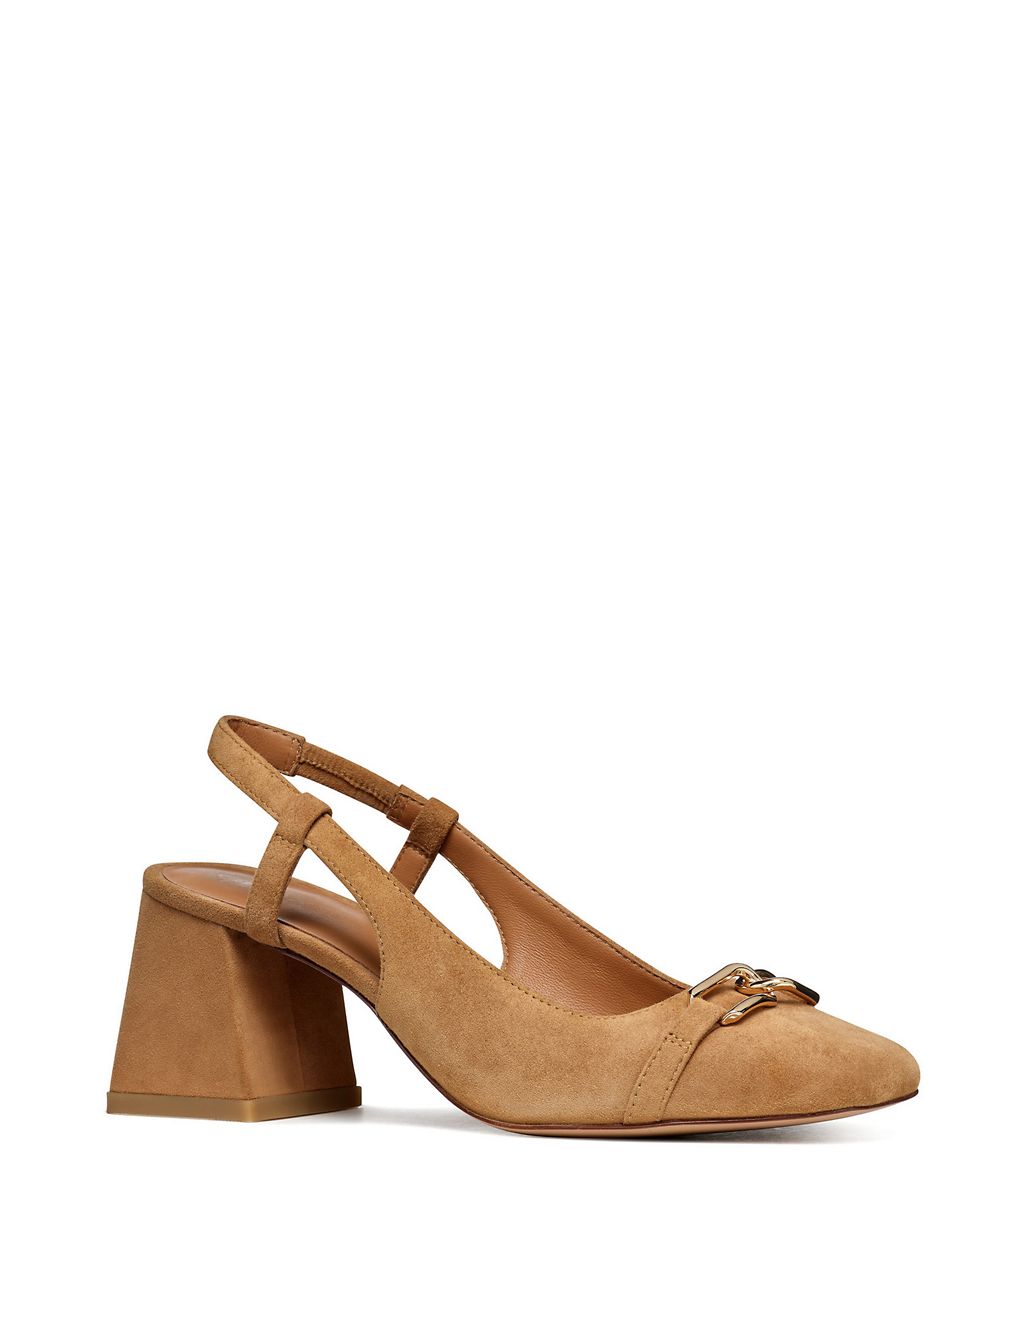 Suede Block Heel Square Toe Slingback Shoes 1 of 6